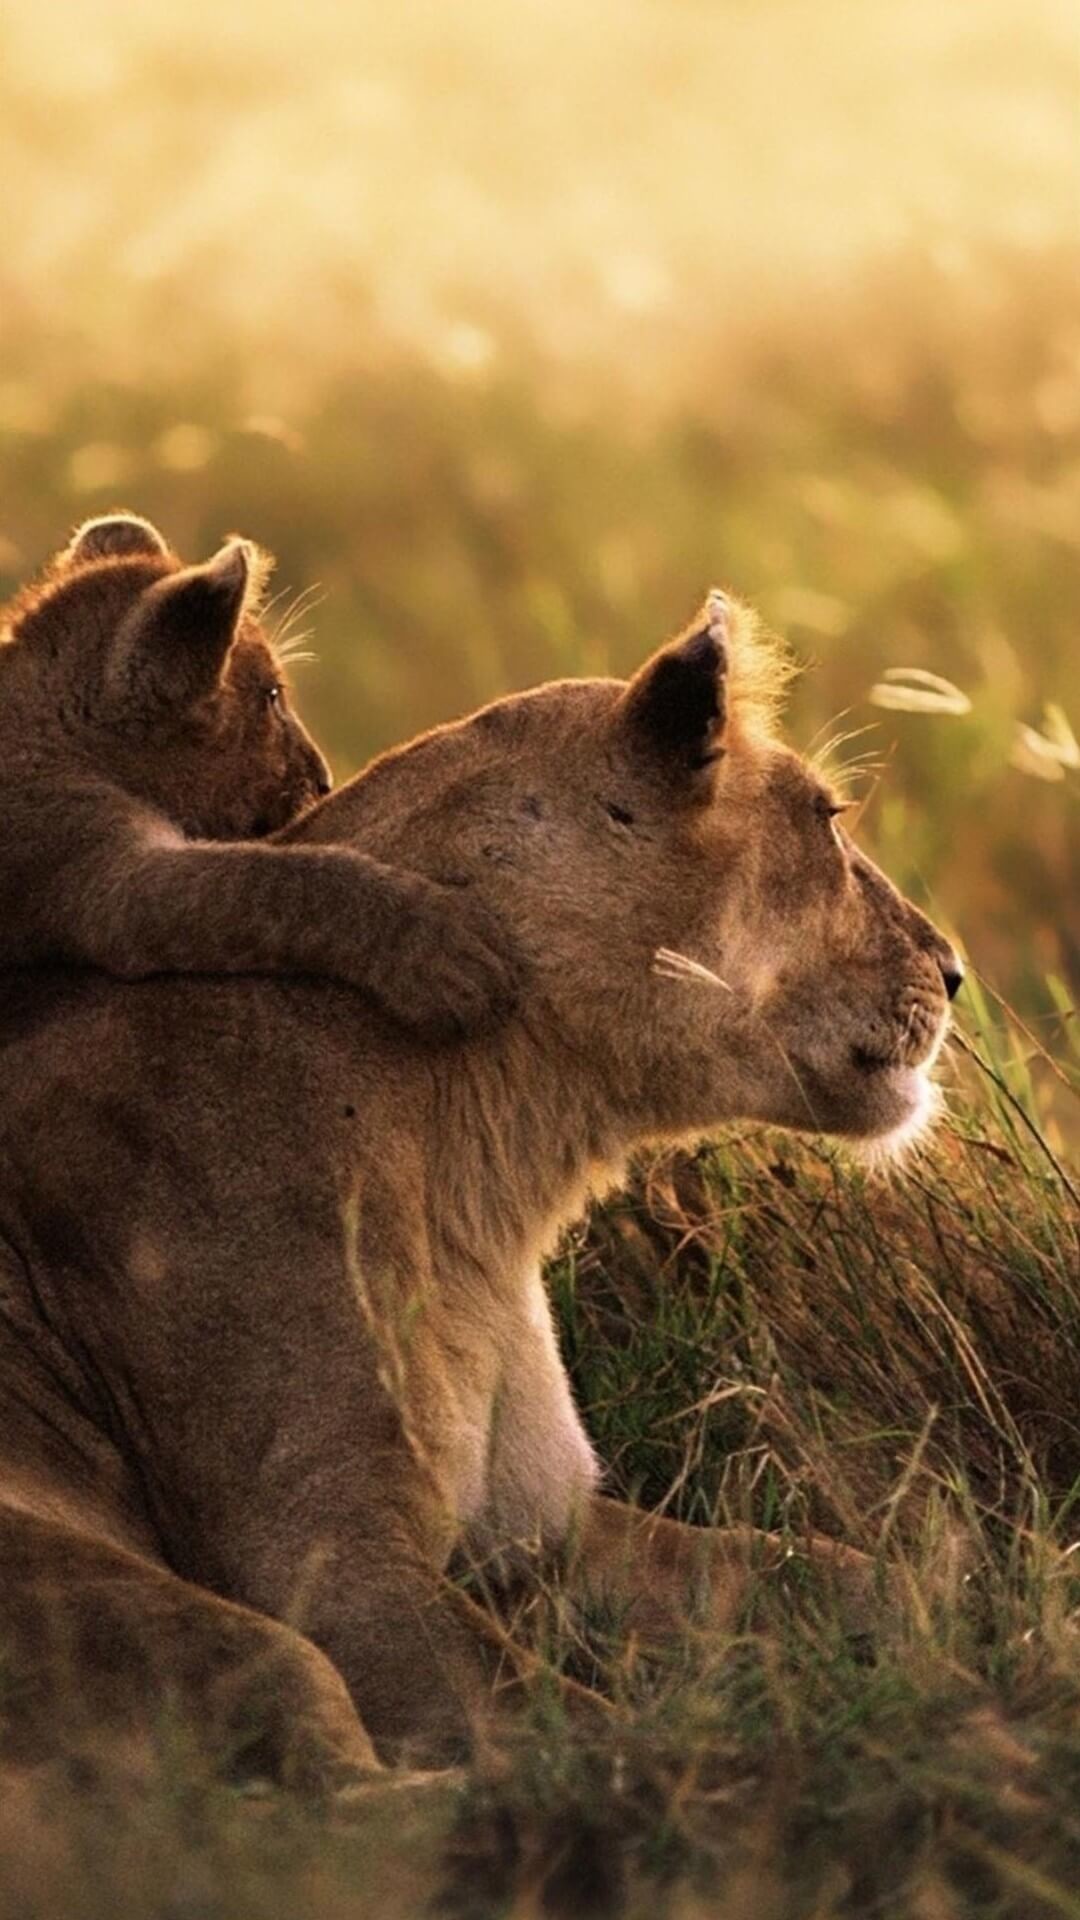 1080x1920 How to download HD Lioness Cub iPhone Wallpaper:-